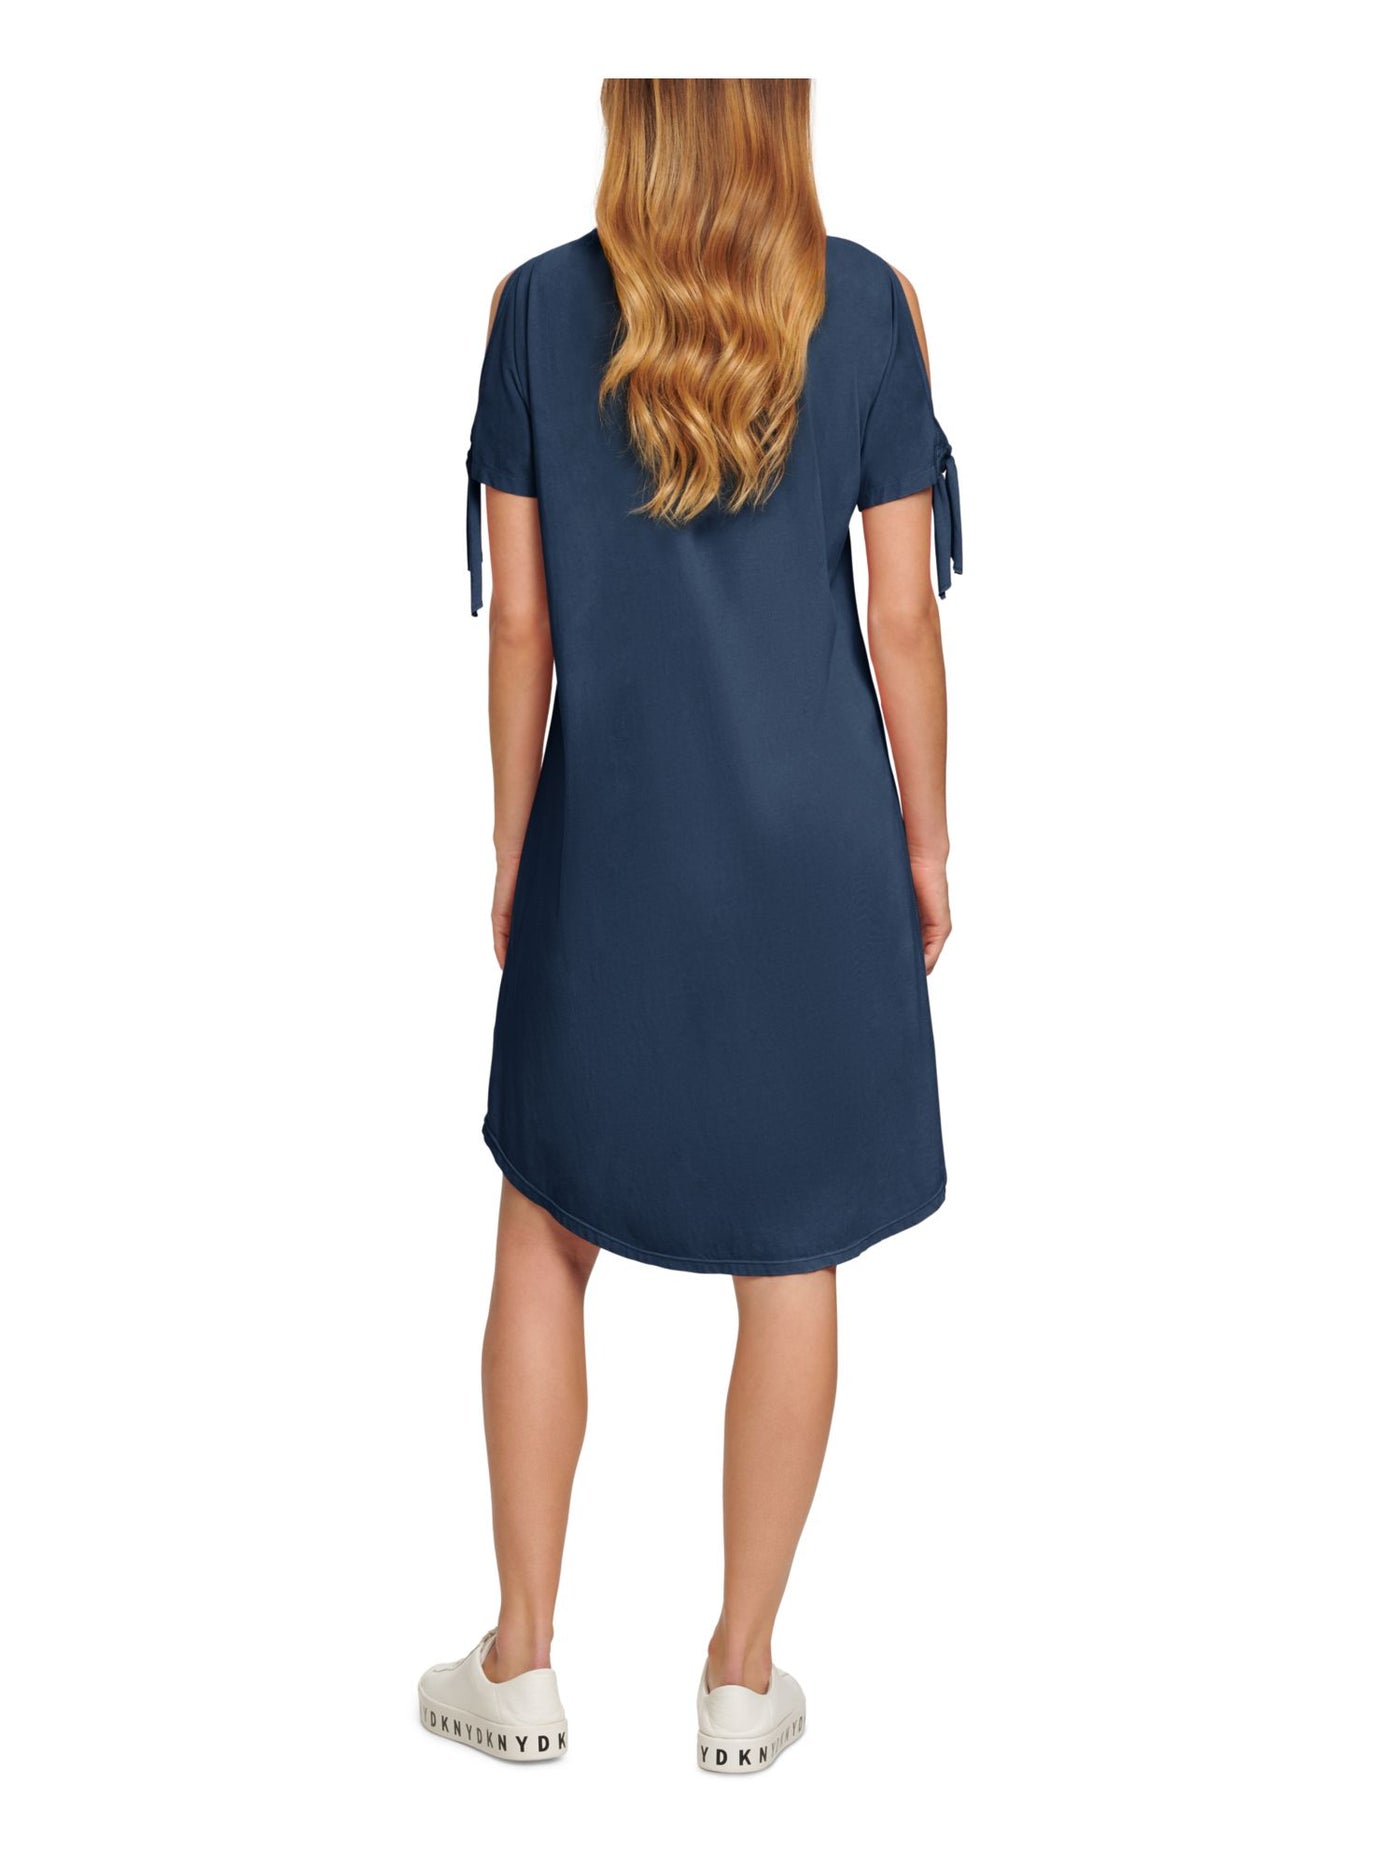 DKNY JEANS Womens Navy Logo Graphic Short Sleeve Scoop Neck Above The Knee Shift Dress M